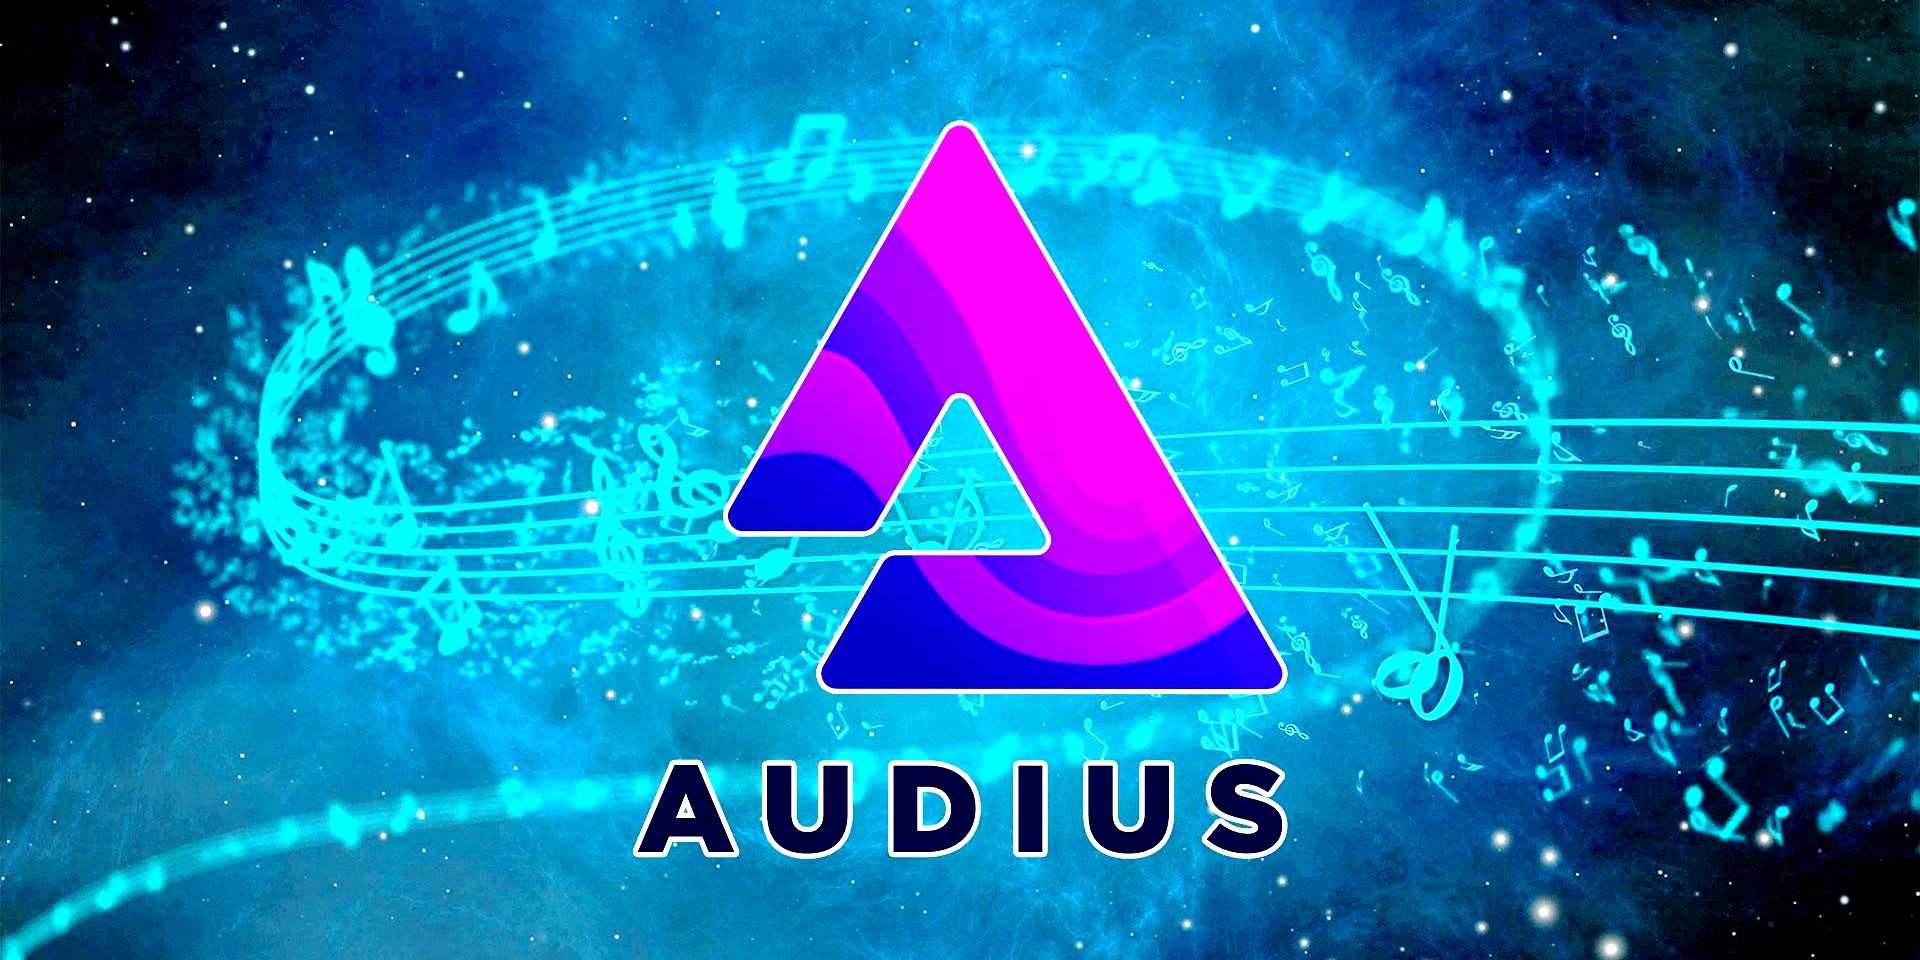 Audius logo on teal background with musical notes